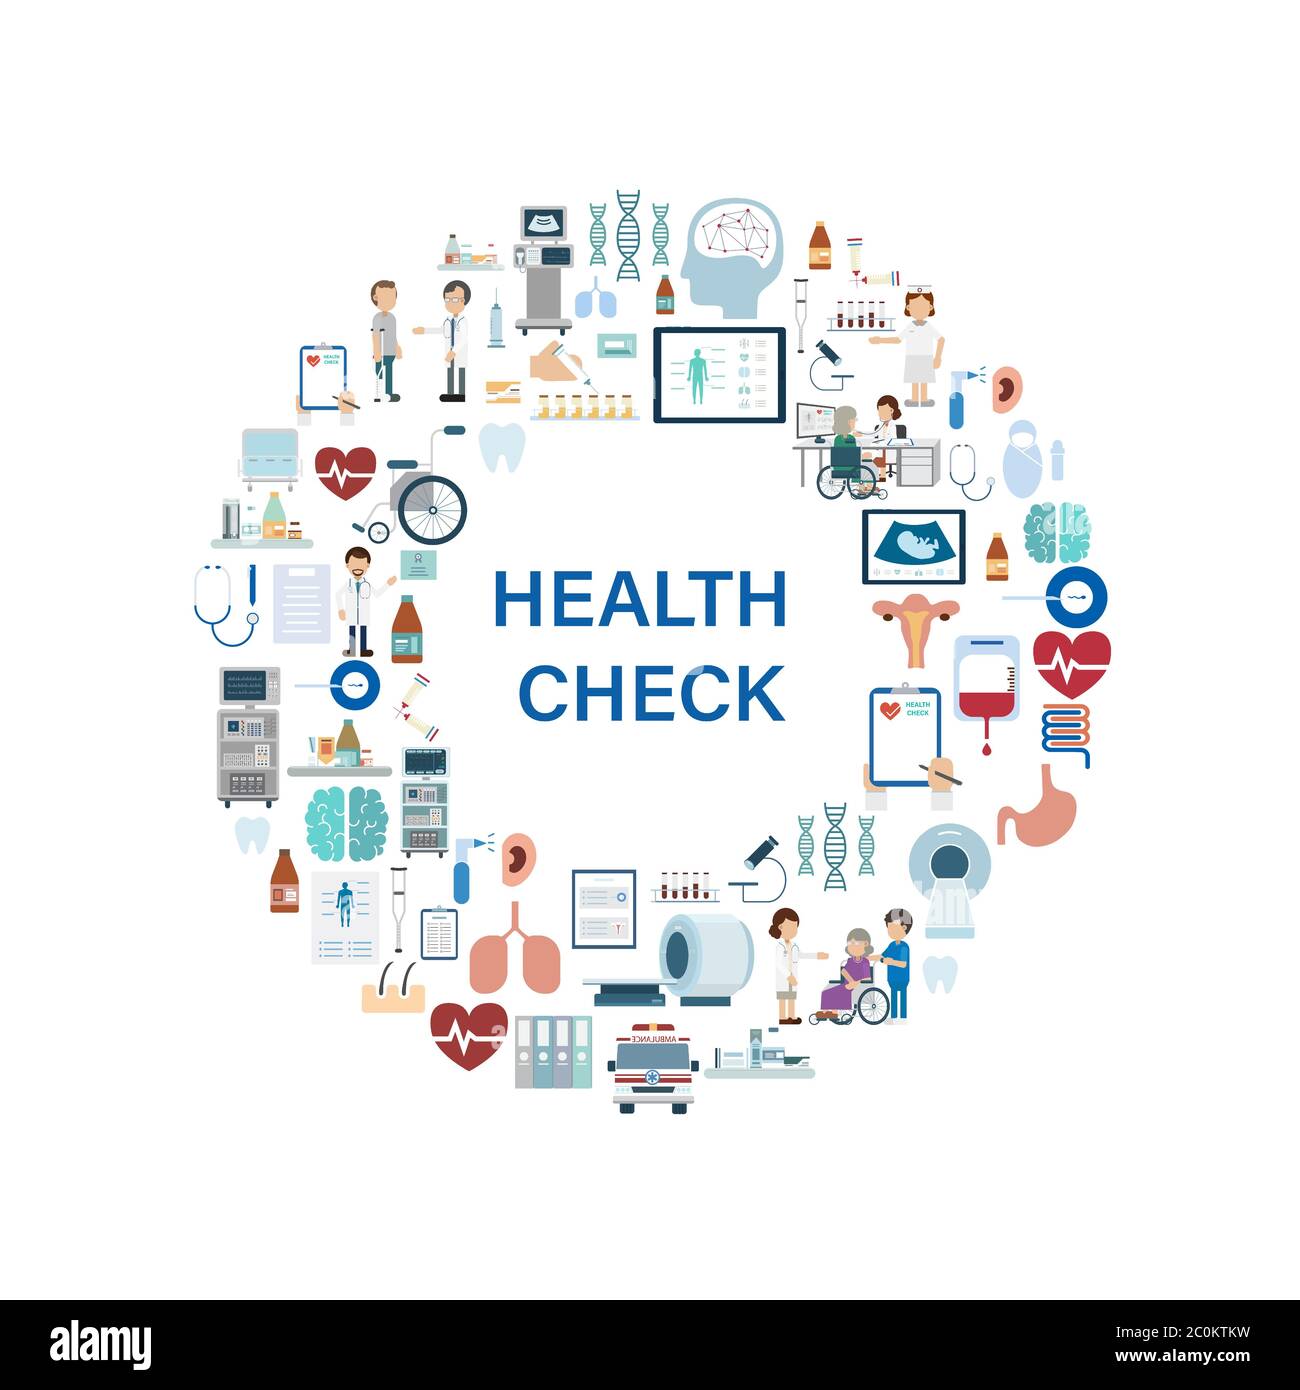 Health check concept with medical icons flat design vector illustration Stock Vector